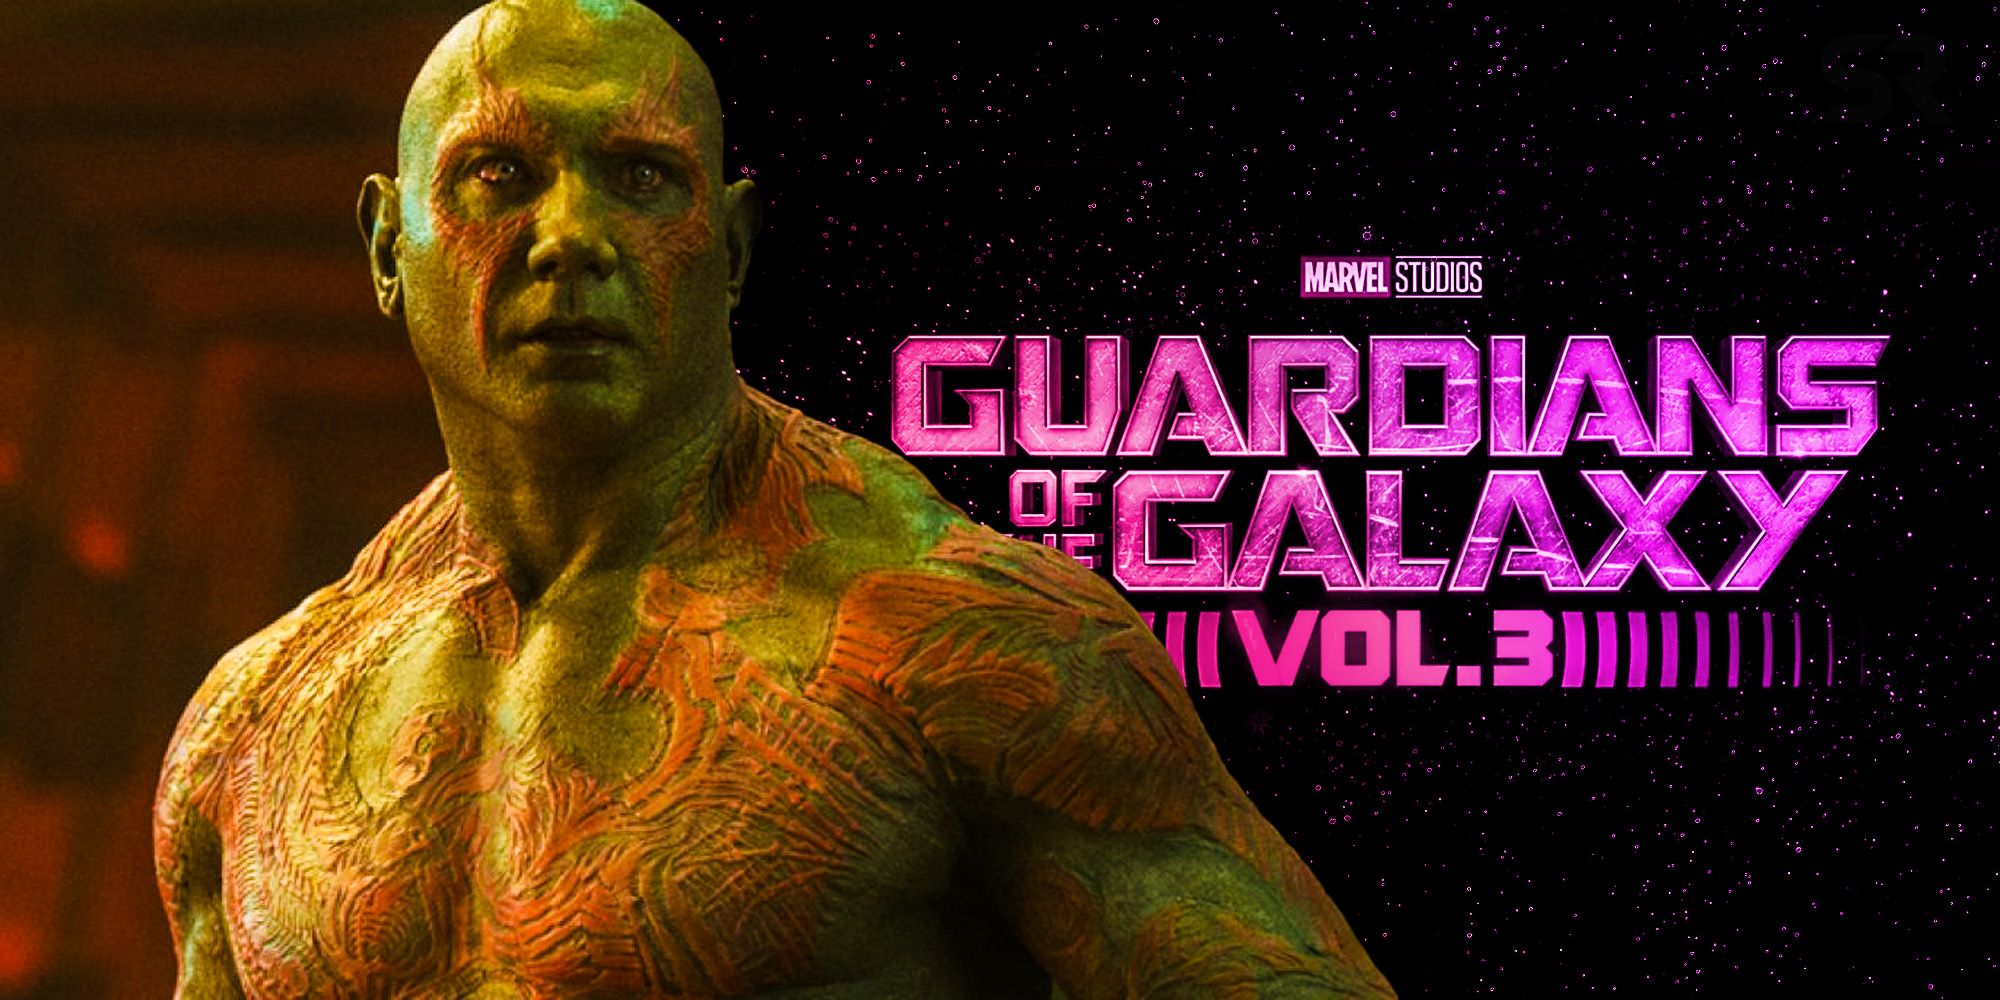 Guardians Of The Galaxy: Every Character's Fate After Vol. 3